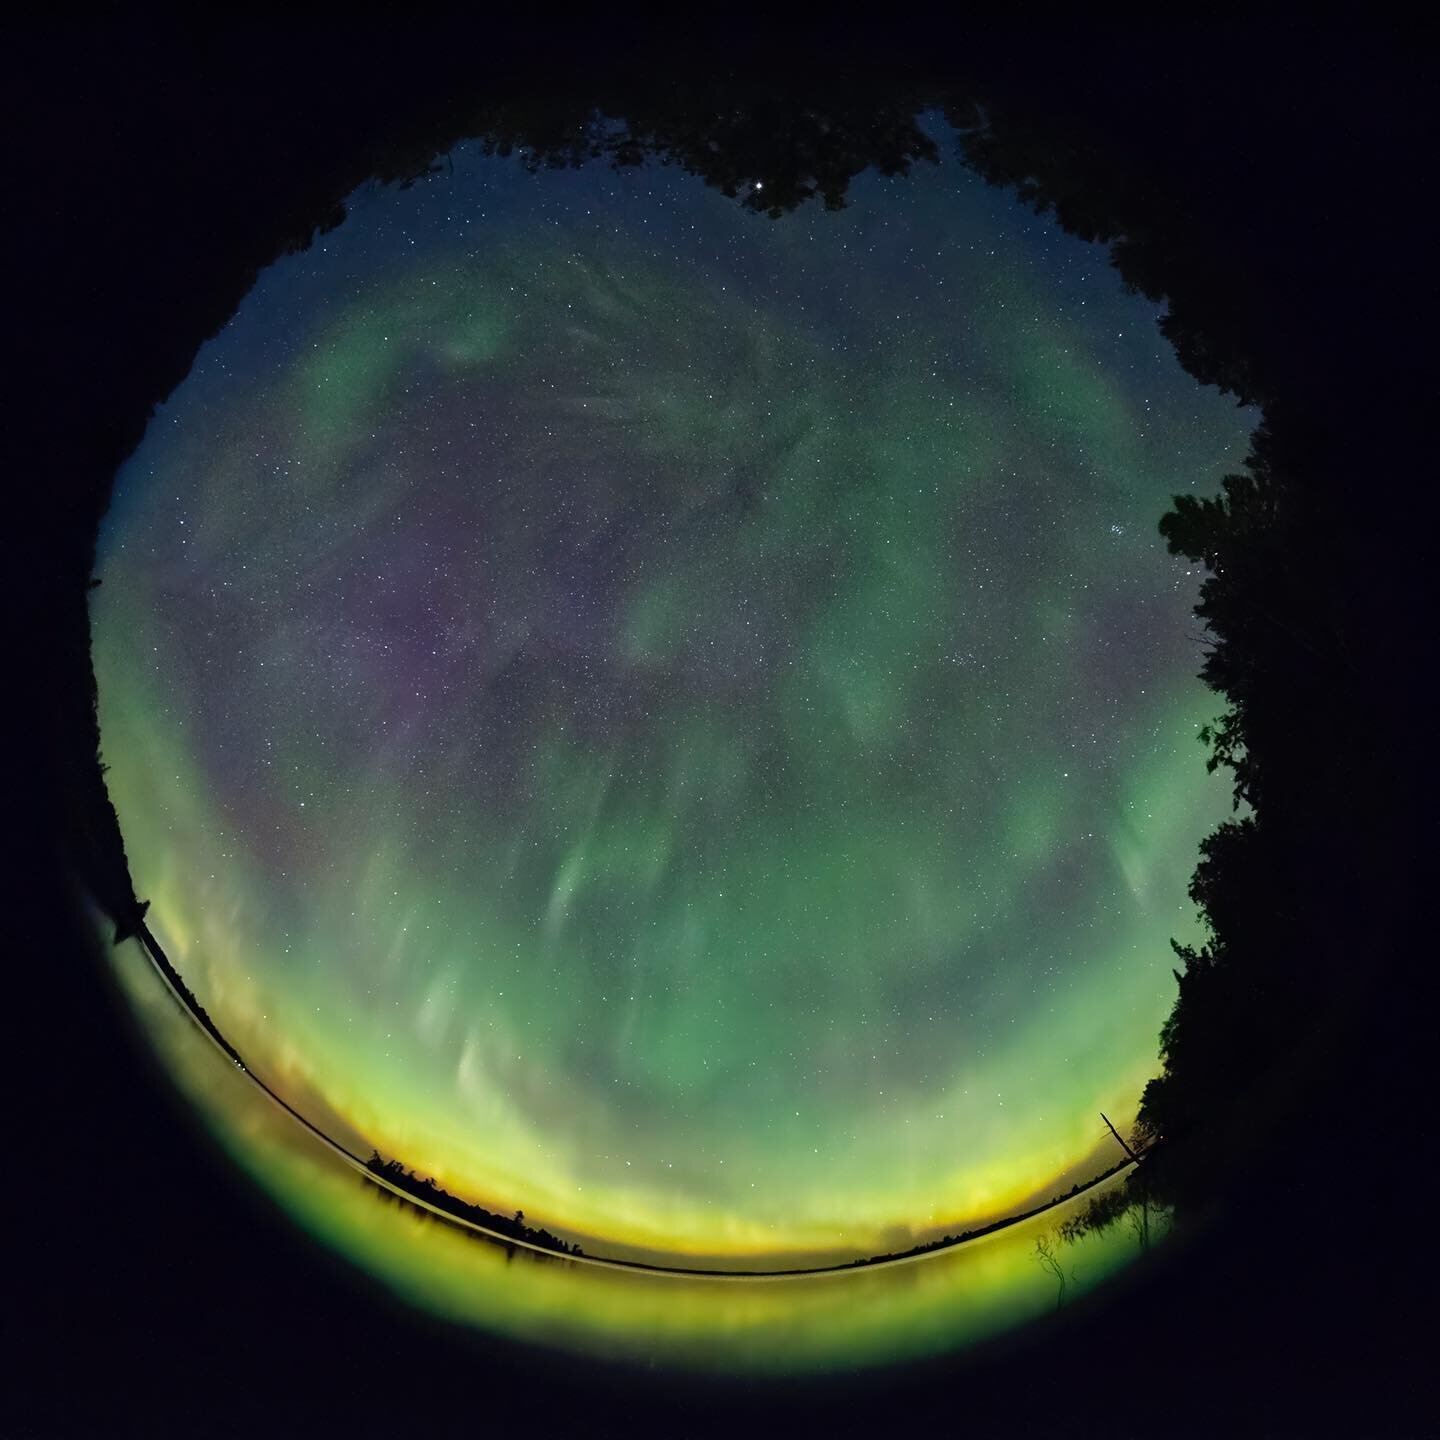 Last Saturday I was aware that conditions were good for a possible display of the Aurora. Remarkably (I live in Minnesota) the weather forecast couldn&rsquo;t have been better - clear, dry, smoke-free, transparent skies. The third leg of the trifecta